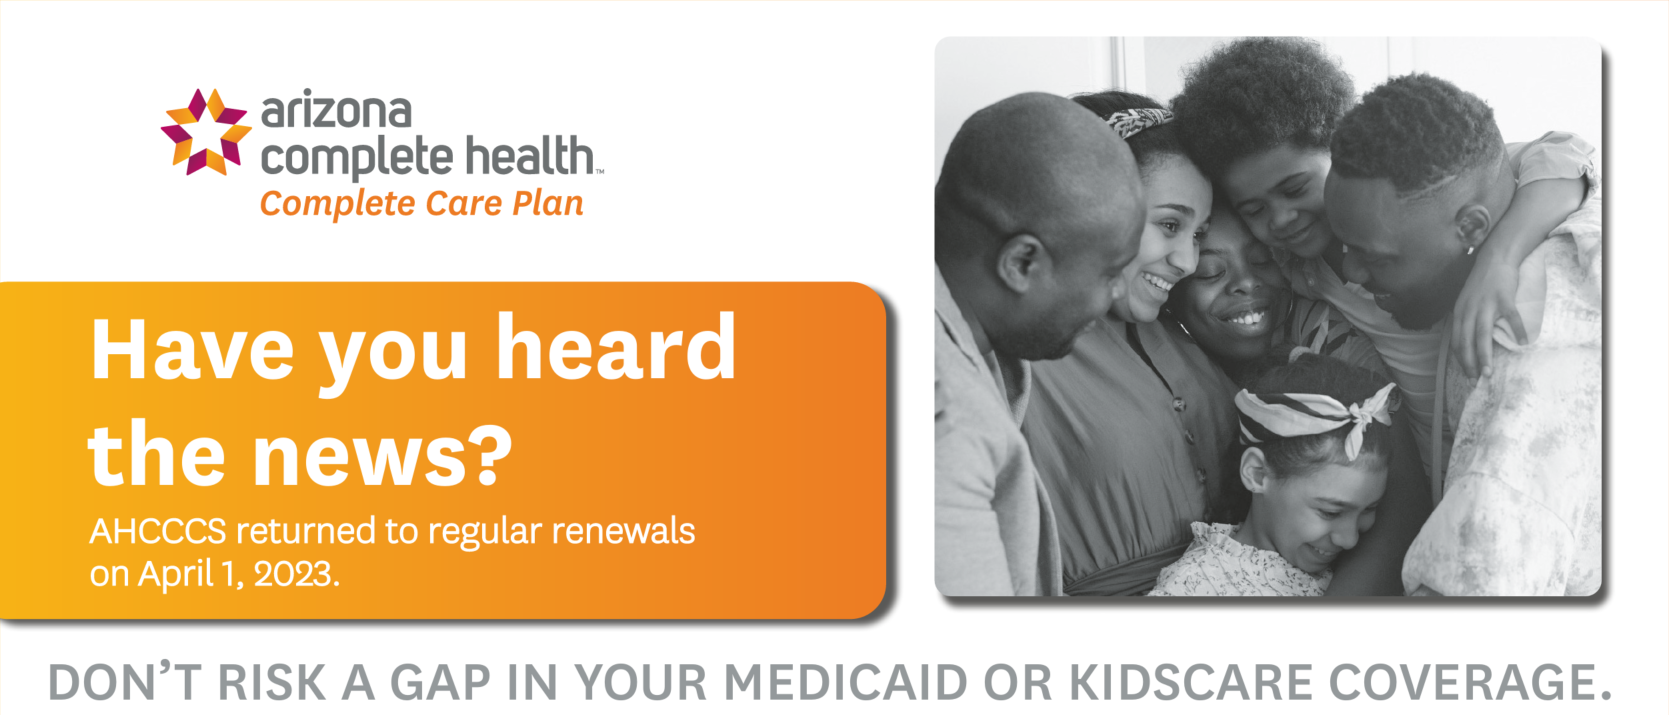 Arizona Complete Health-Complete Care Plan Have you heard the news? AHCCCS will return to regular renewals beginning April 1. DON’T RISK A GAP IN YOUR MEDICAID OR KIDSCARE COVERAGE.GET READY TO RENEW NOW.